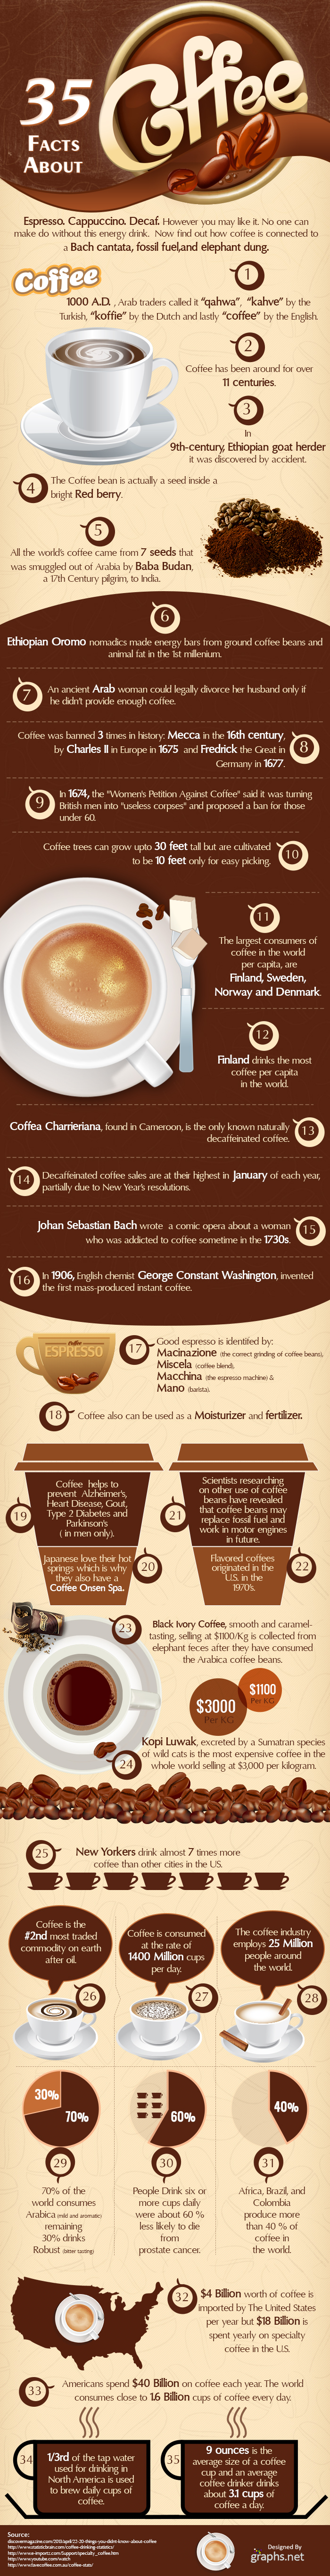 interesting facts about coffee